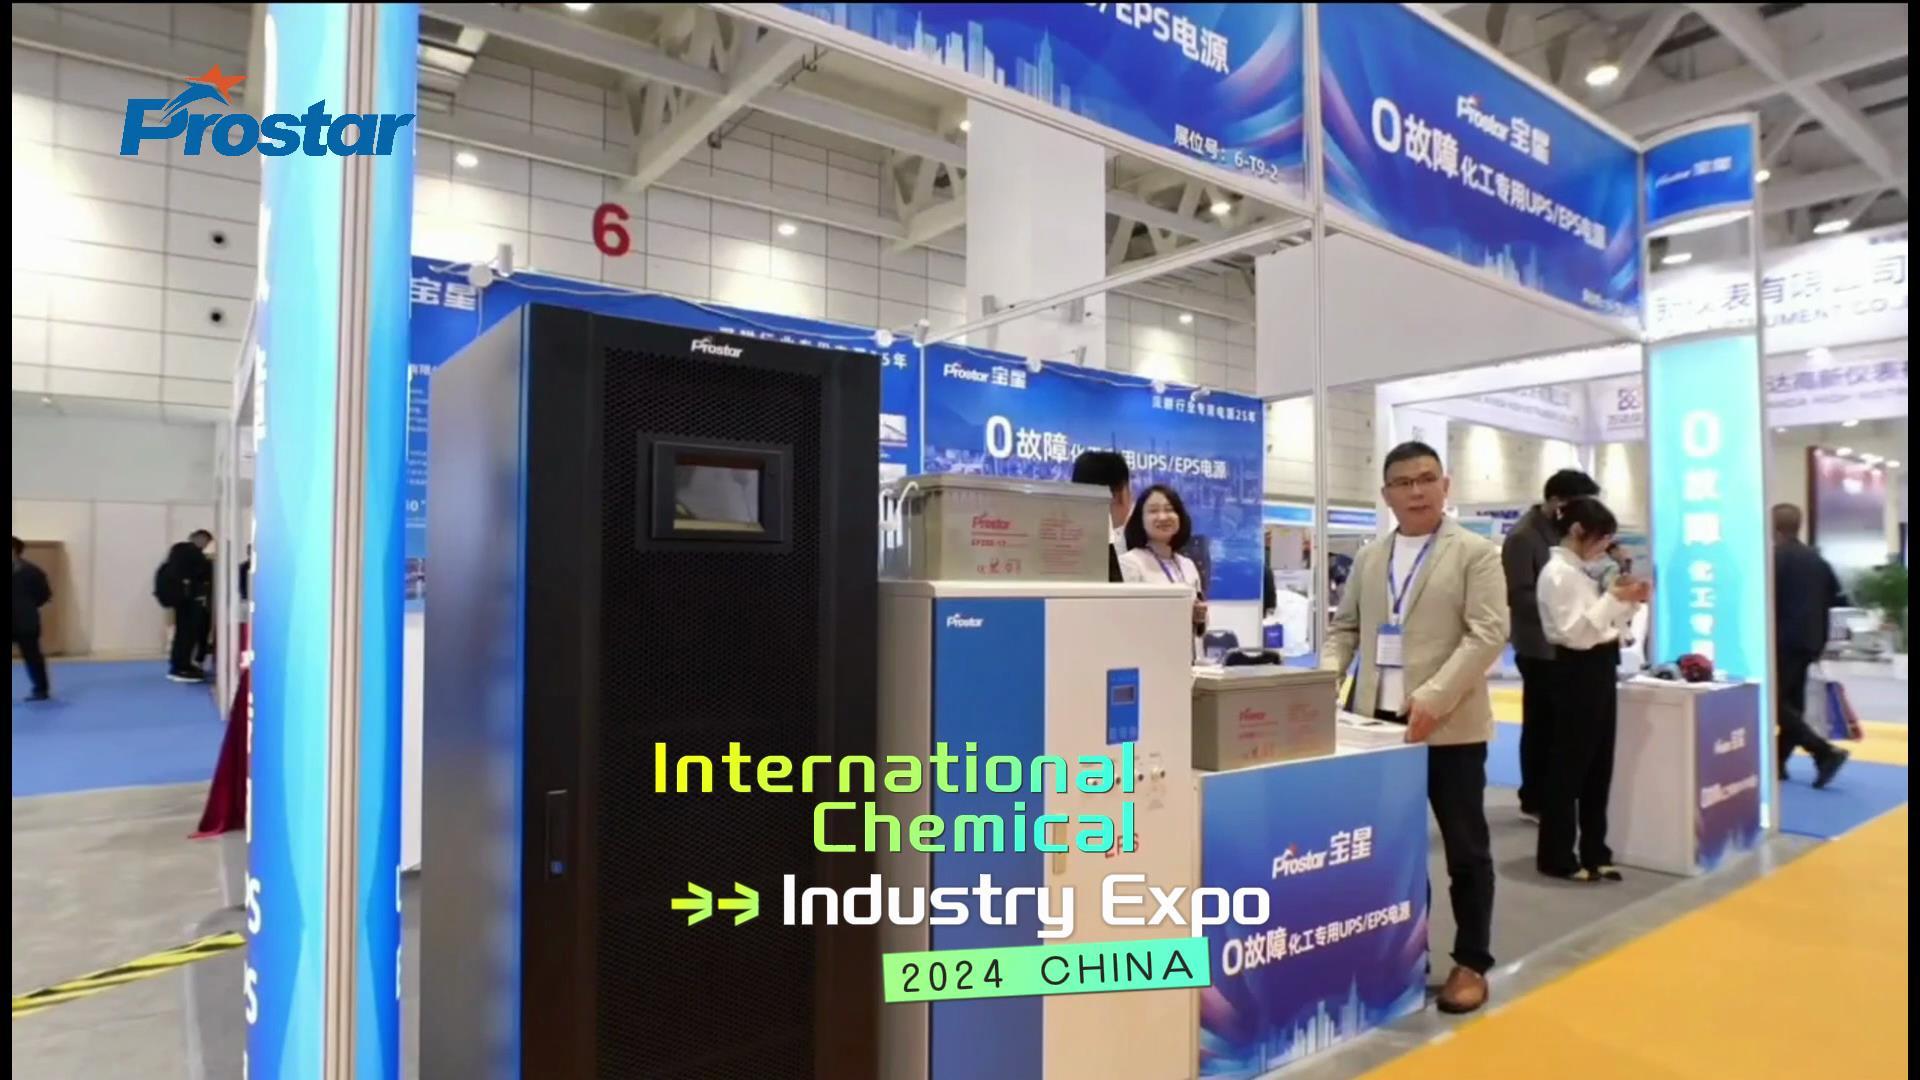 China (Jinan) International Chemical Industry Expo in 2024